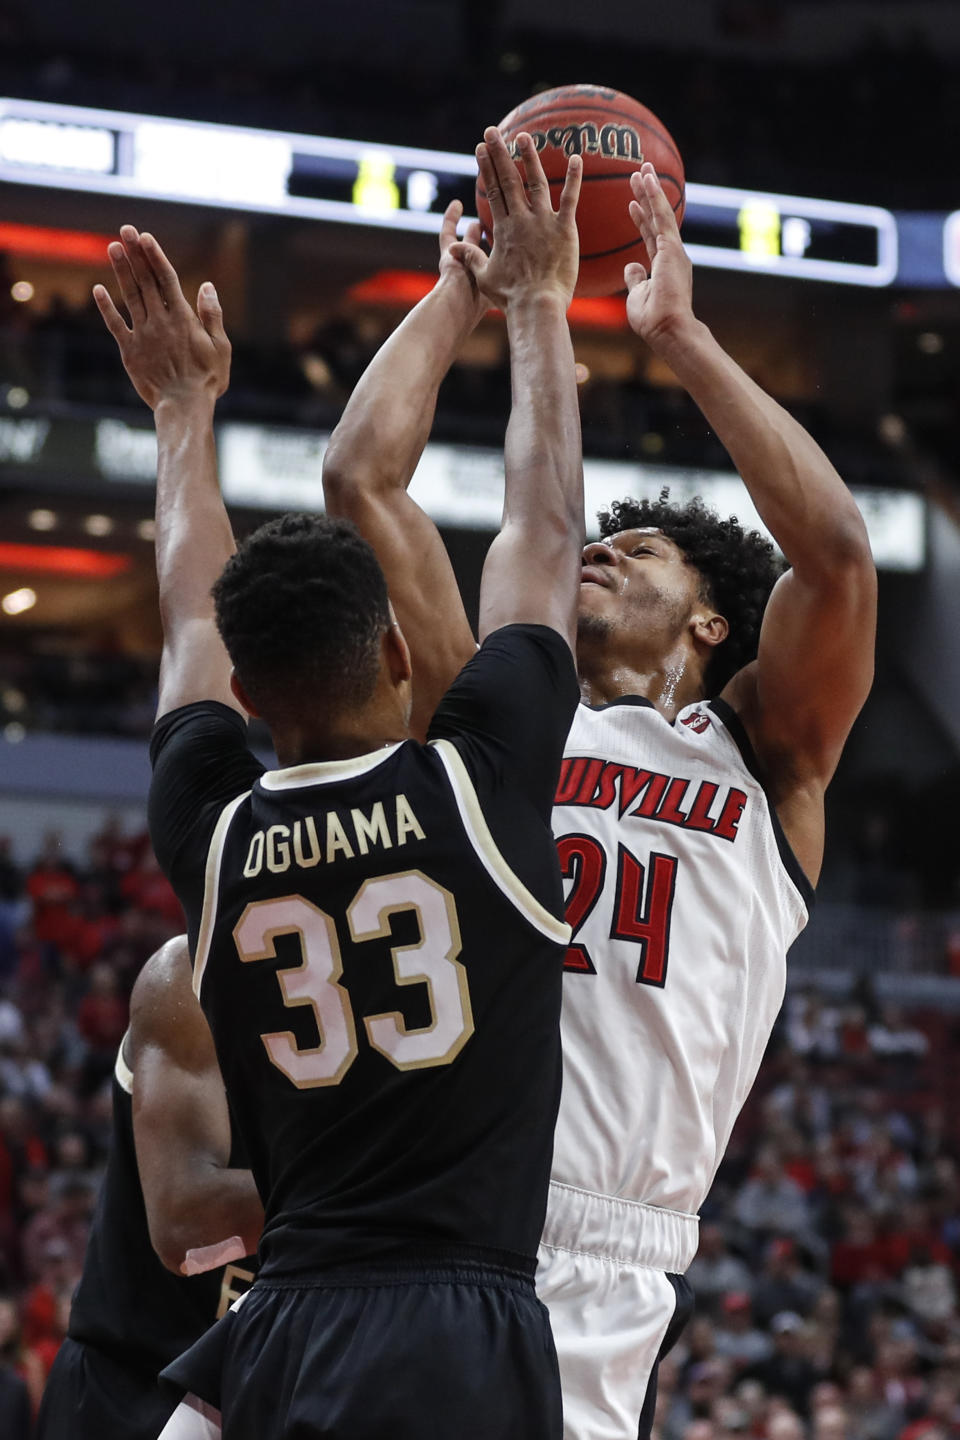 Louisville forward Dwayne Sutton (24) is fouled by Wake Forest forward Ody Oguama (33) during the second half of an NCAA college basketball game Wednesday, Feb. 5, 2020, in Louisville, Ky. Louisville won 86-76. (AP Photo/Wade Payne)